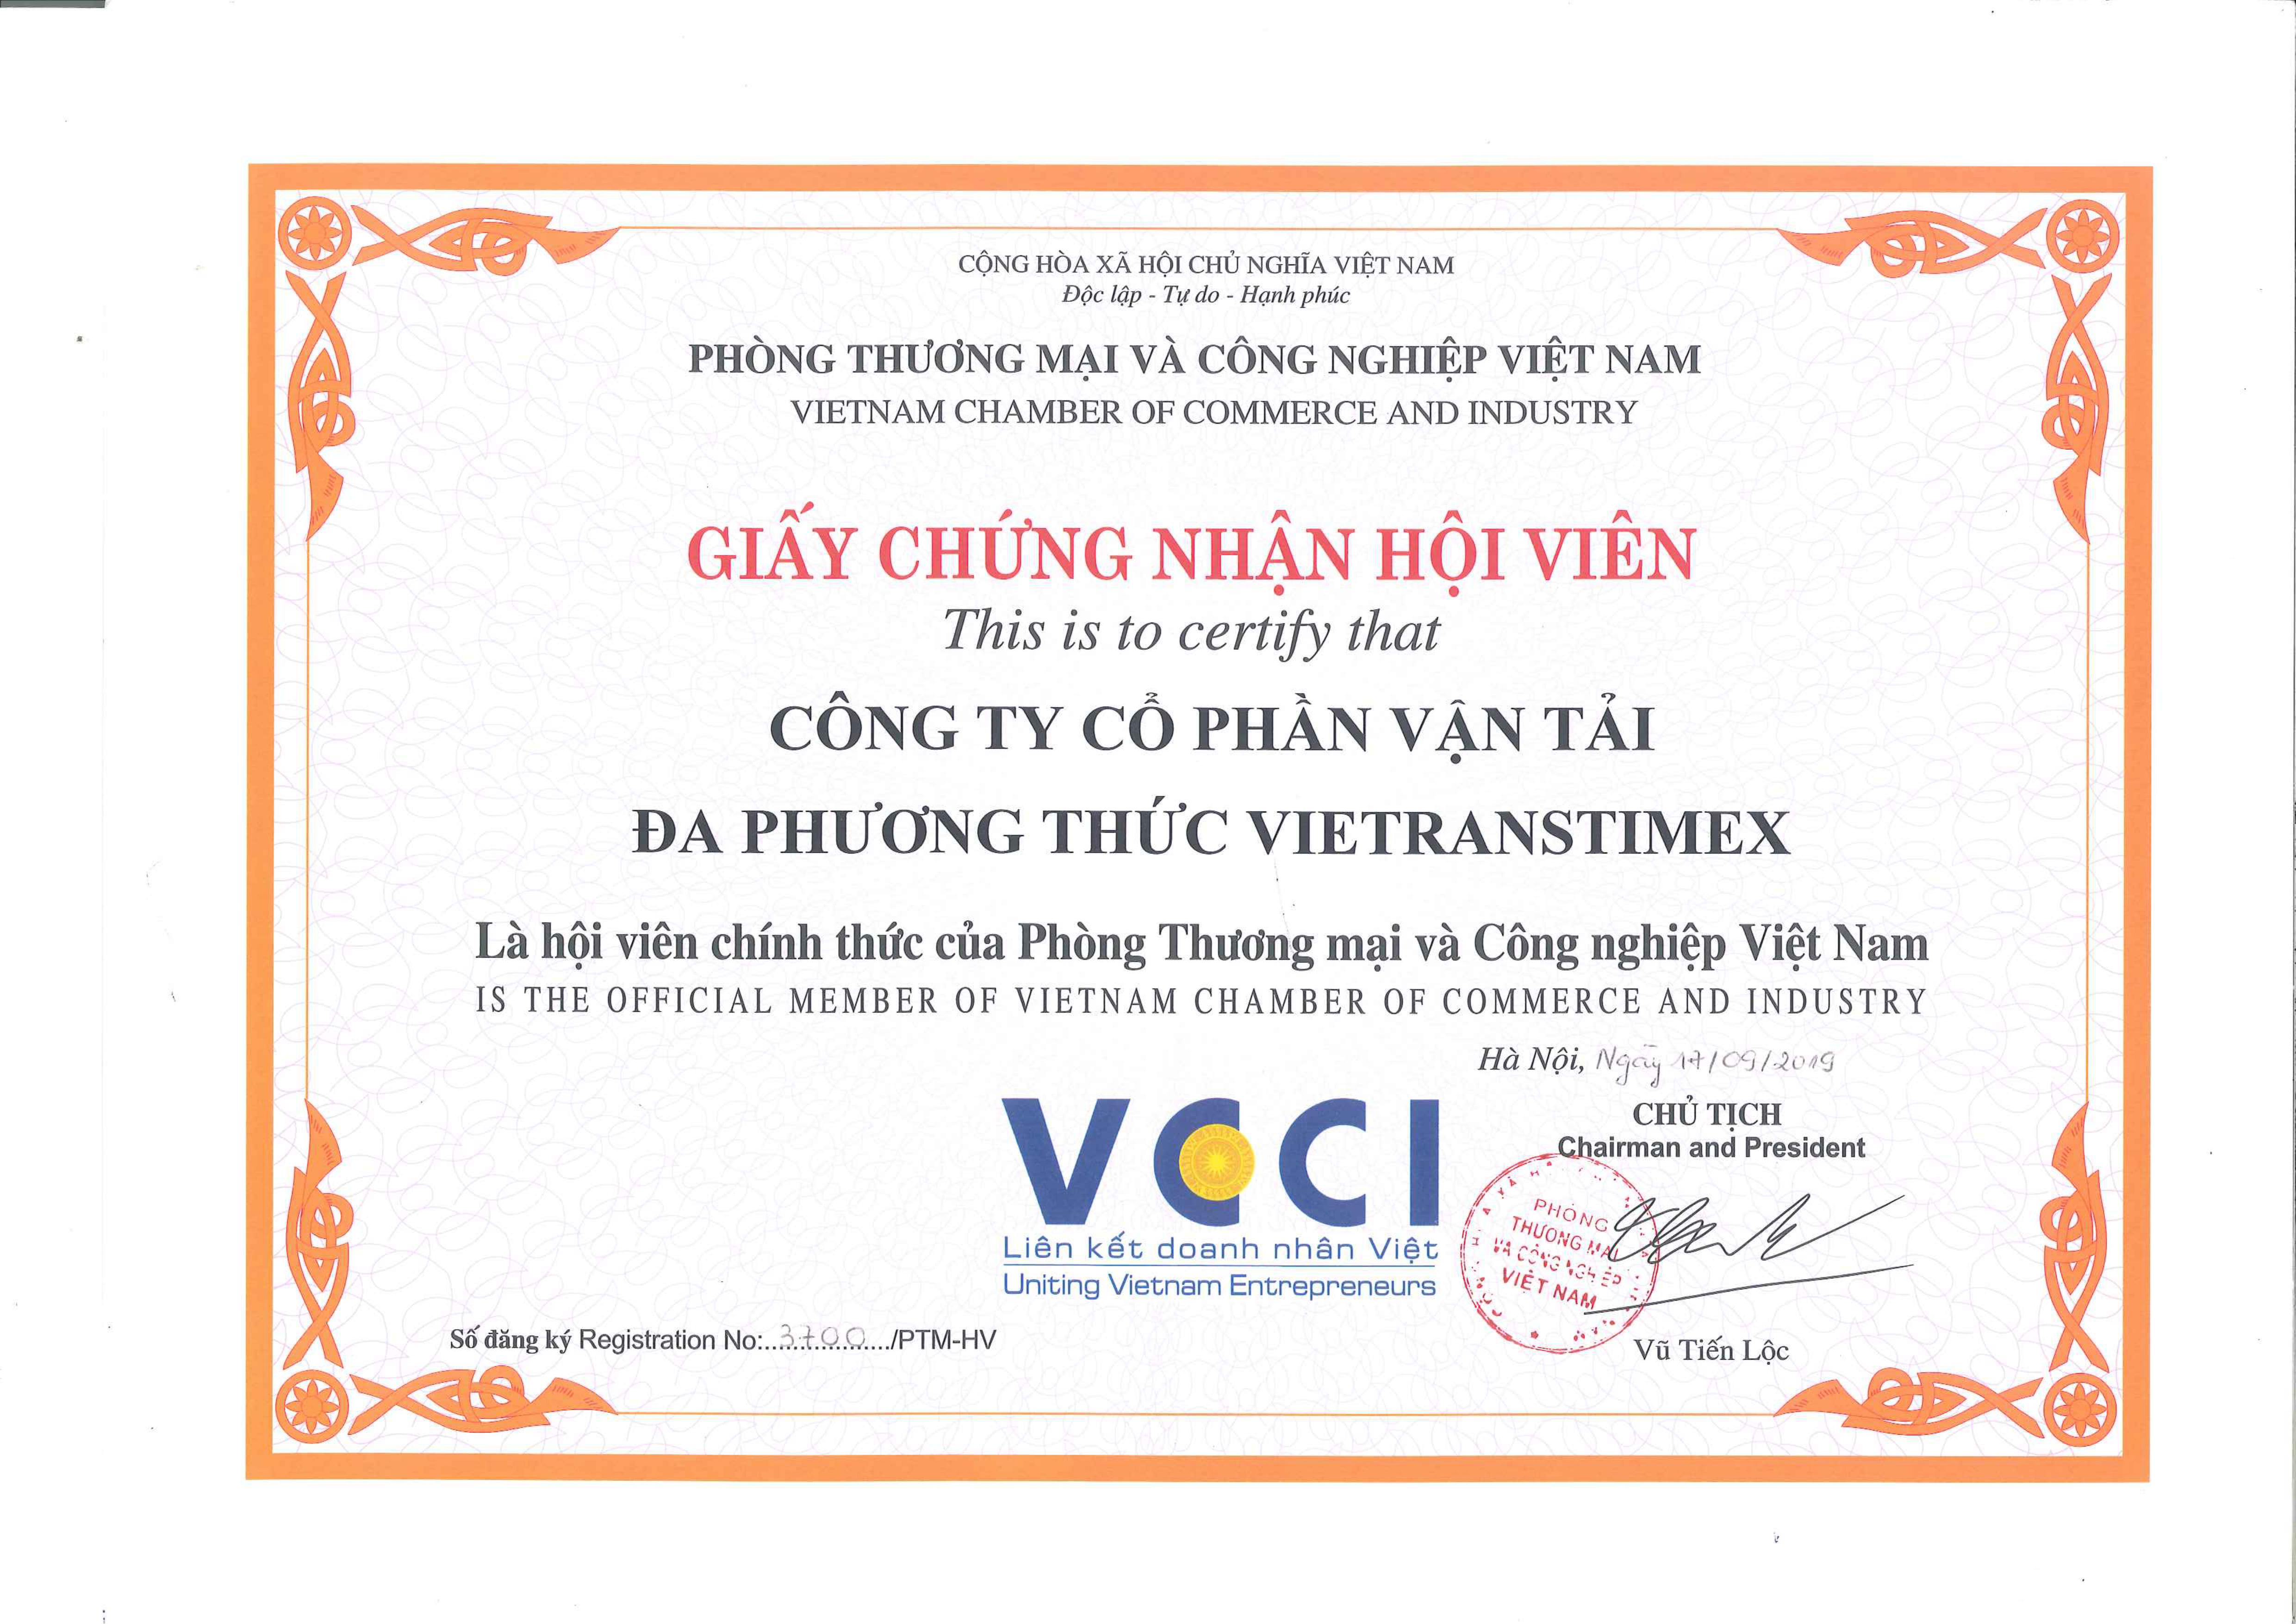 Vietnam Chamber of Commerce and Industry (VCCI)